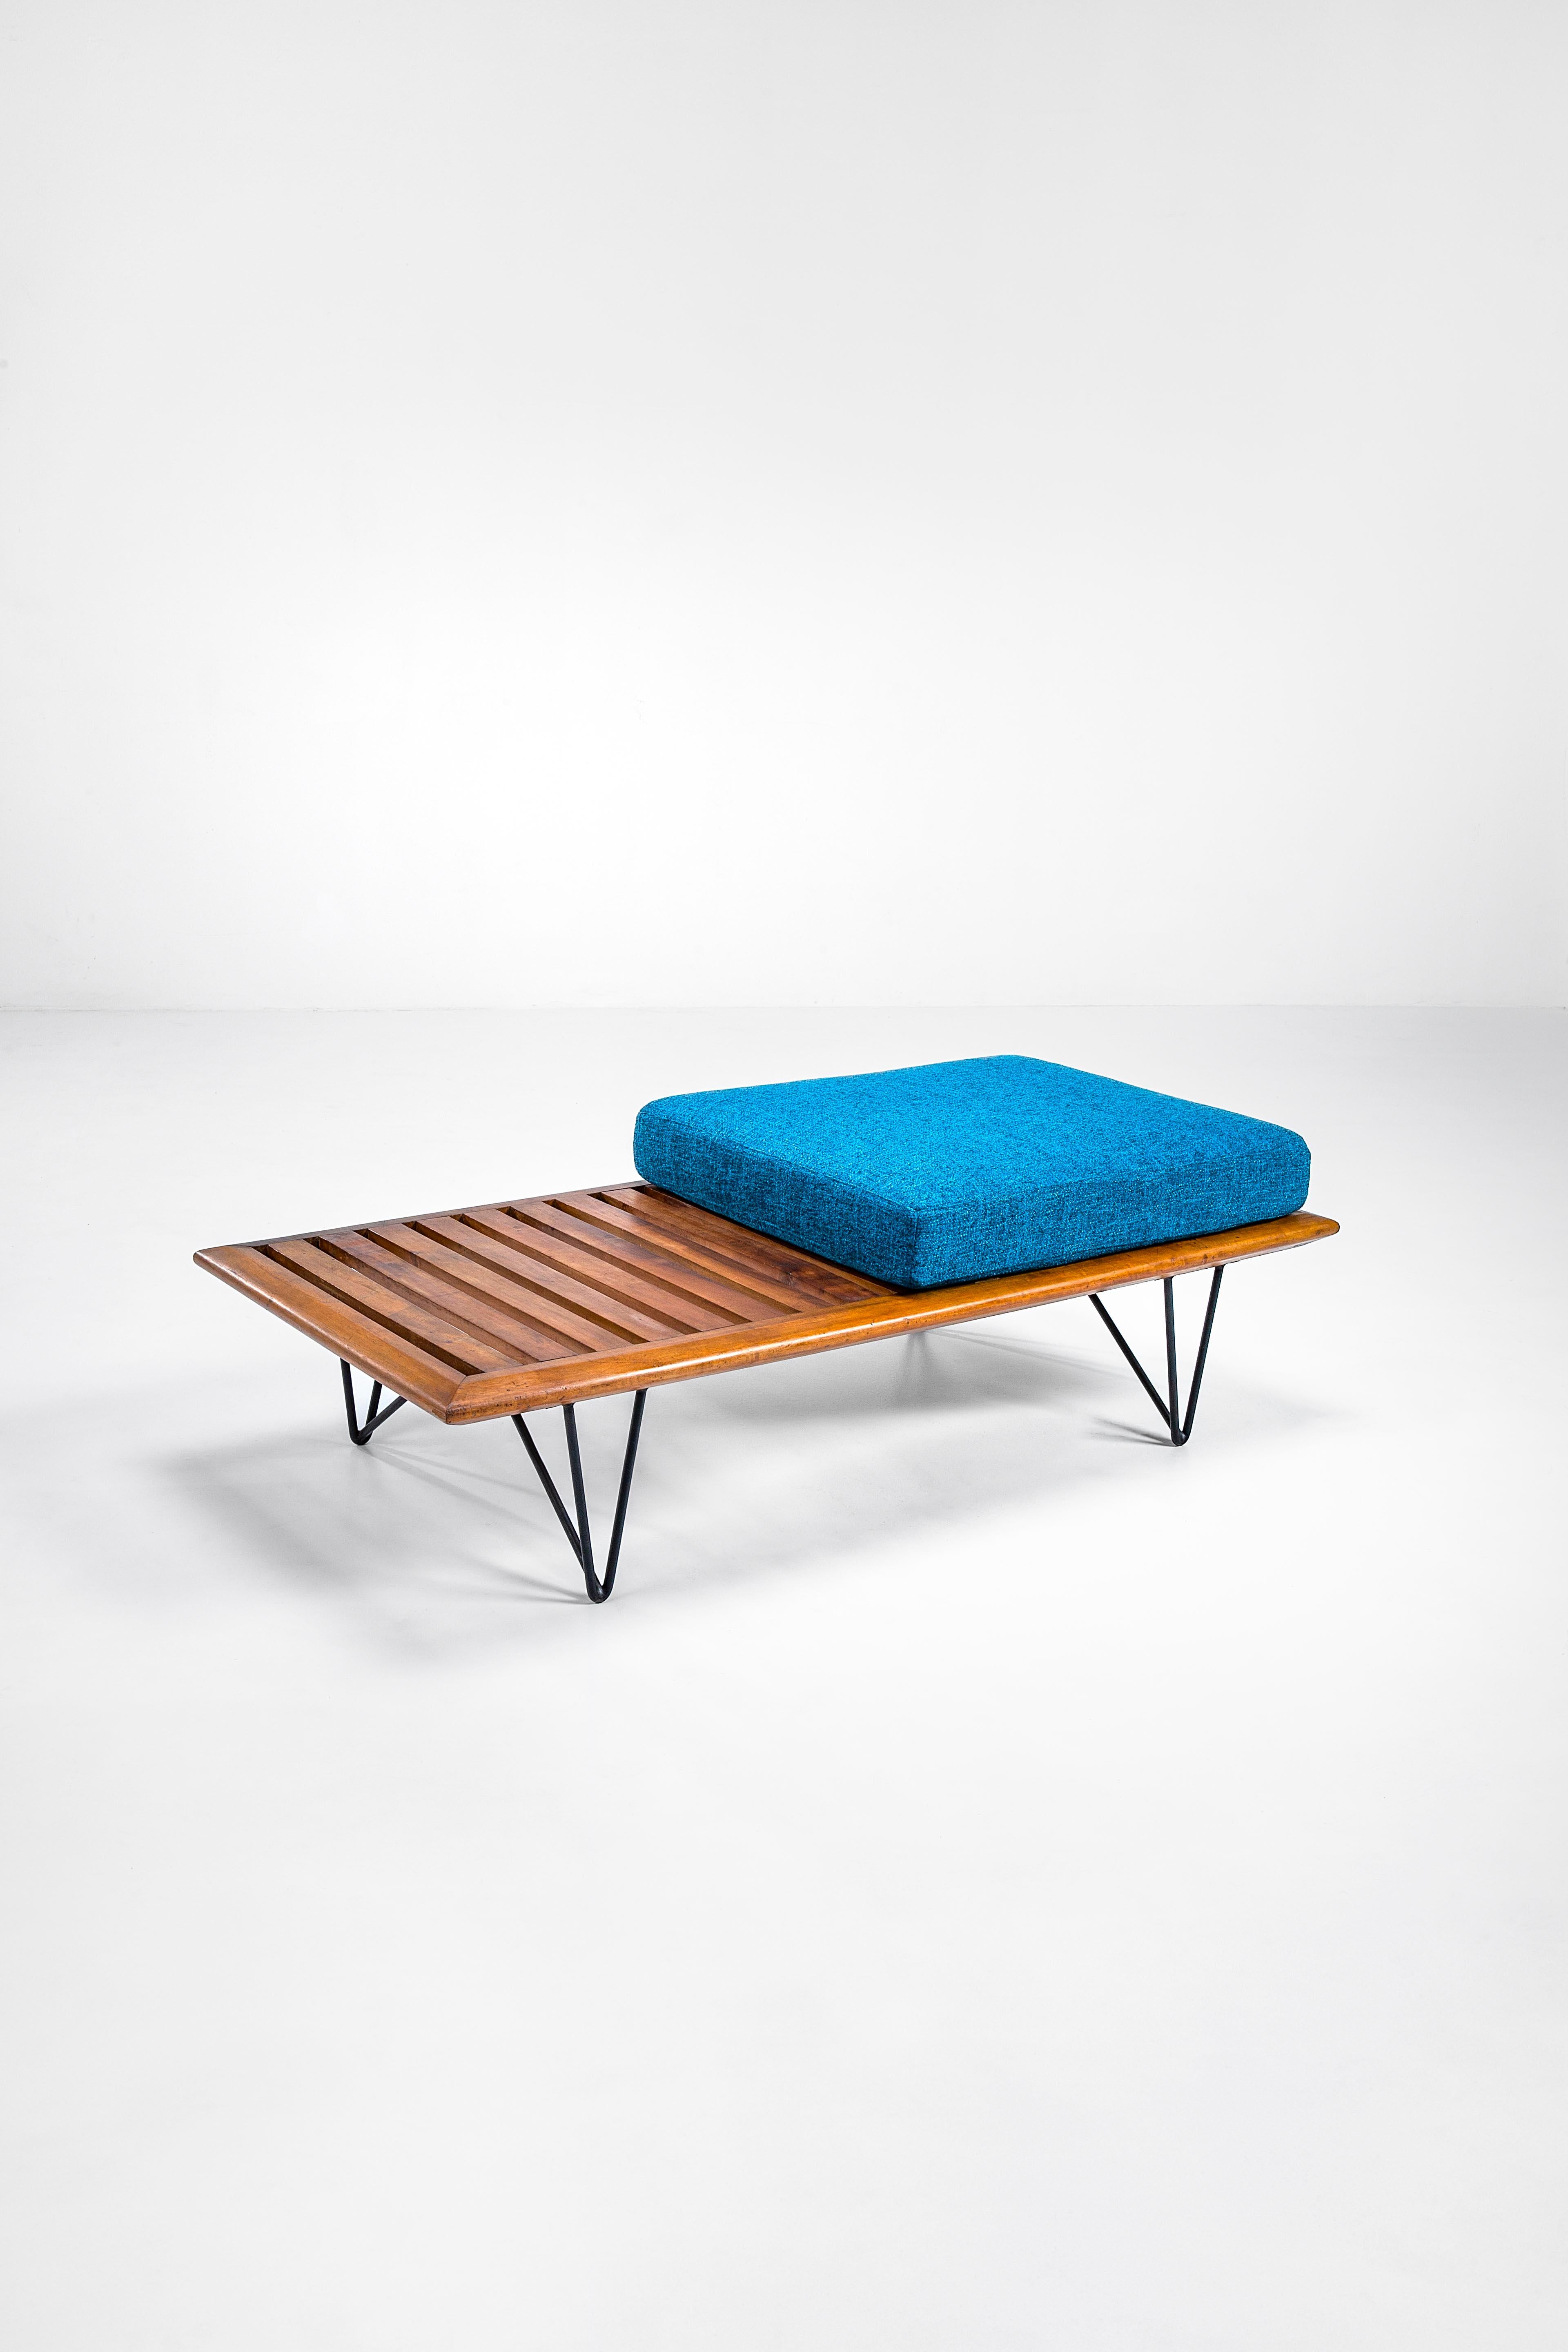 This delicate bench with a suspended seat on leather or fabric strips and a thick fabric cushion is accompanied by a section that functions as a tabletop. The overall structure is wood, with tubular metal supports. The forms thus trace the